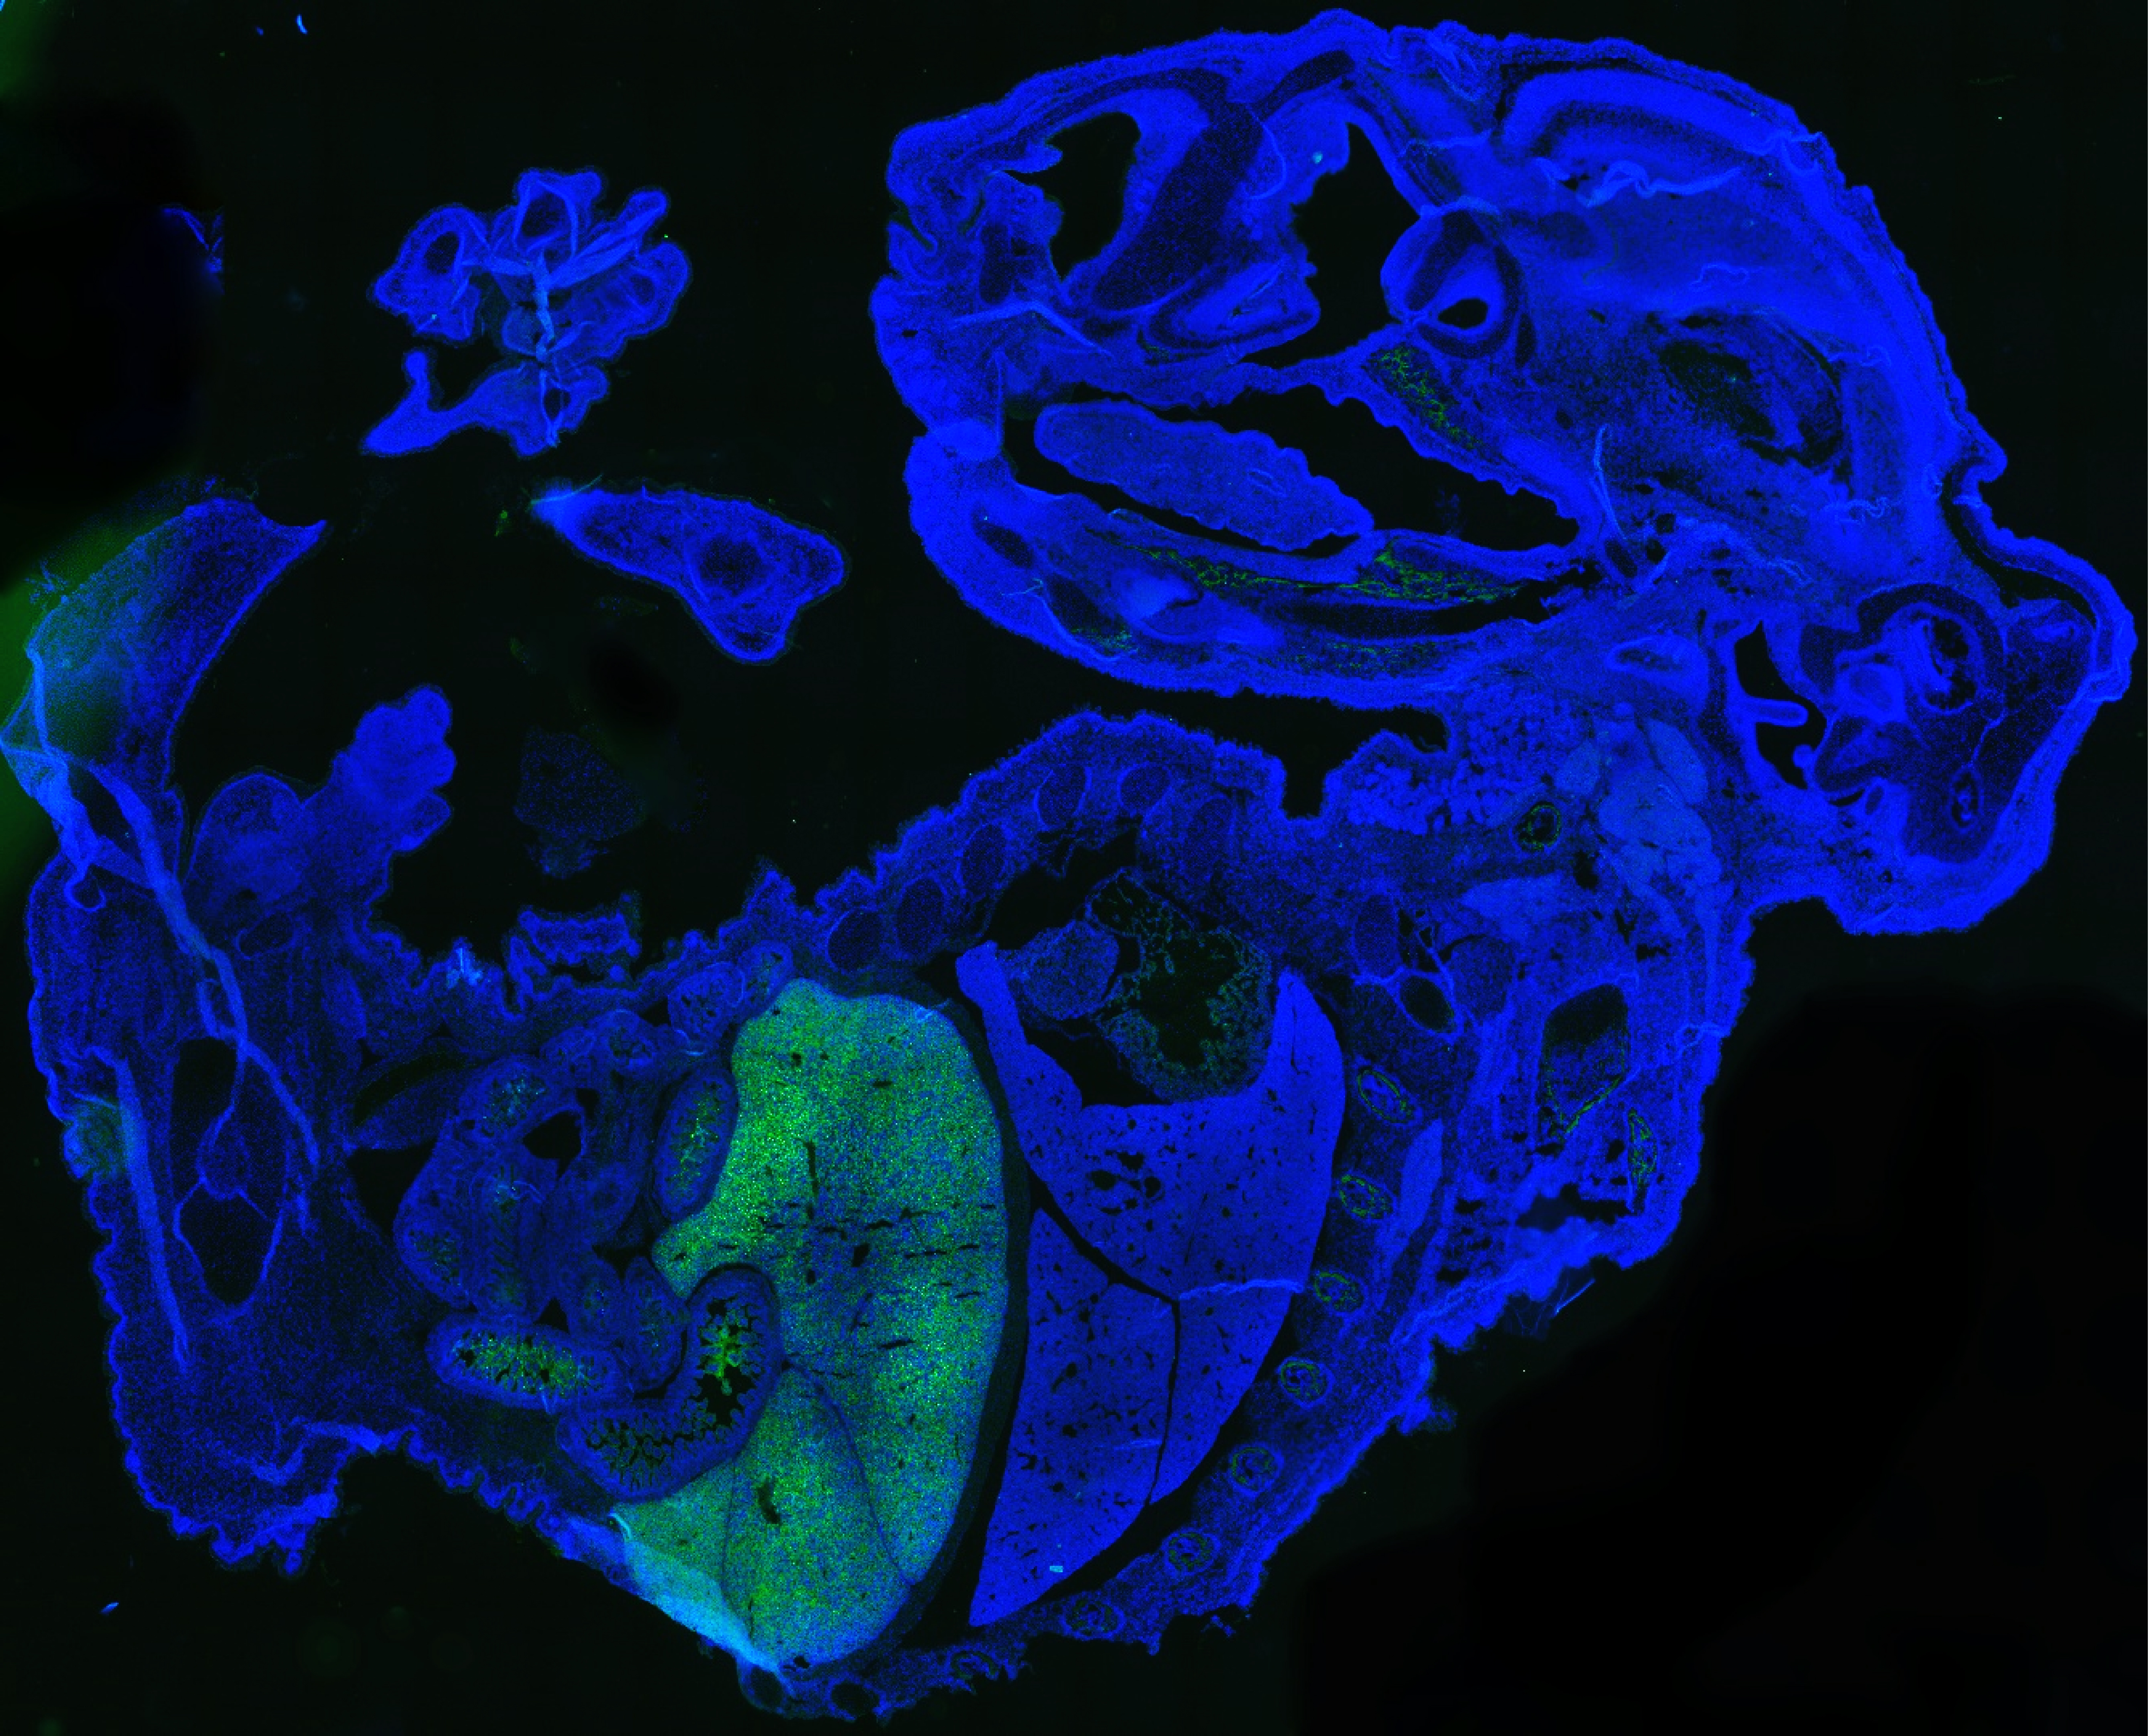 A mouse embryo shows up blue with a green area 